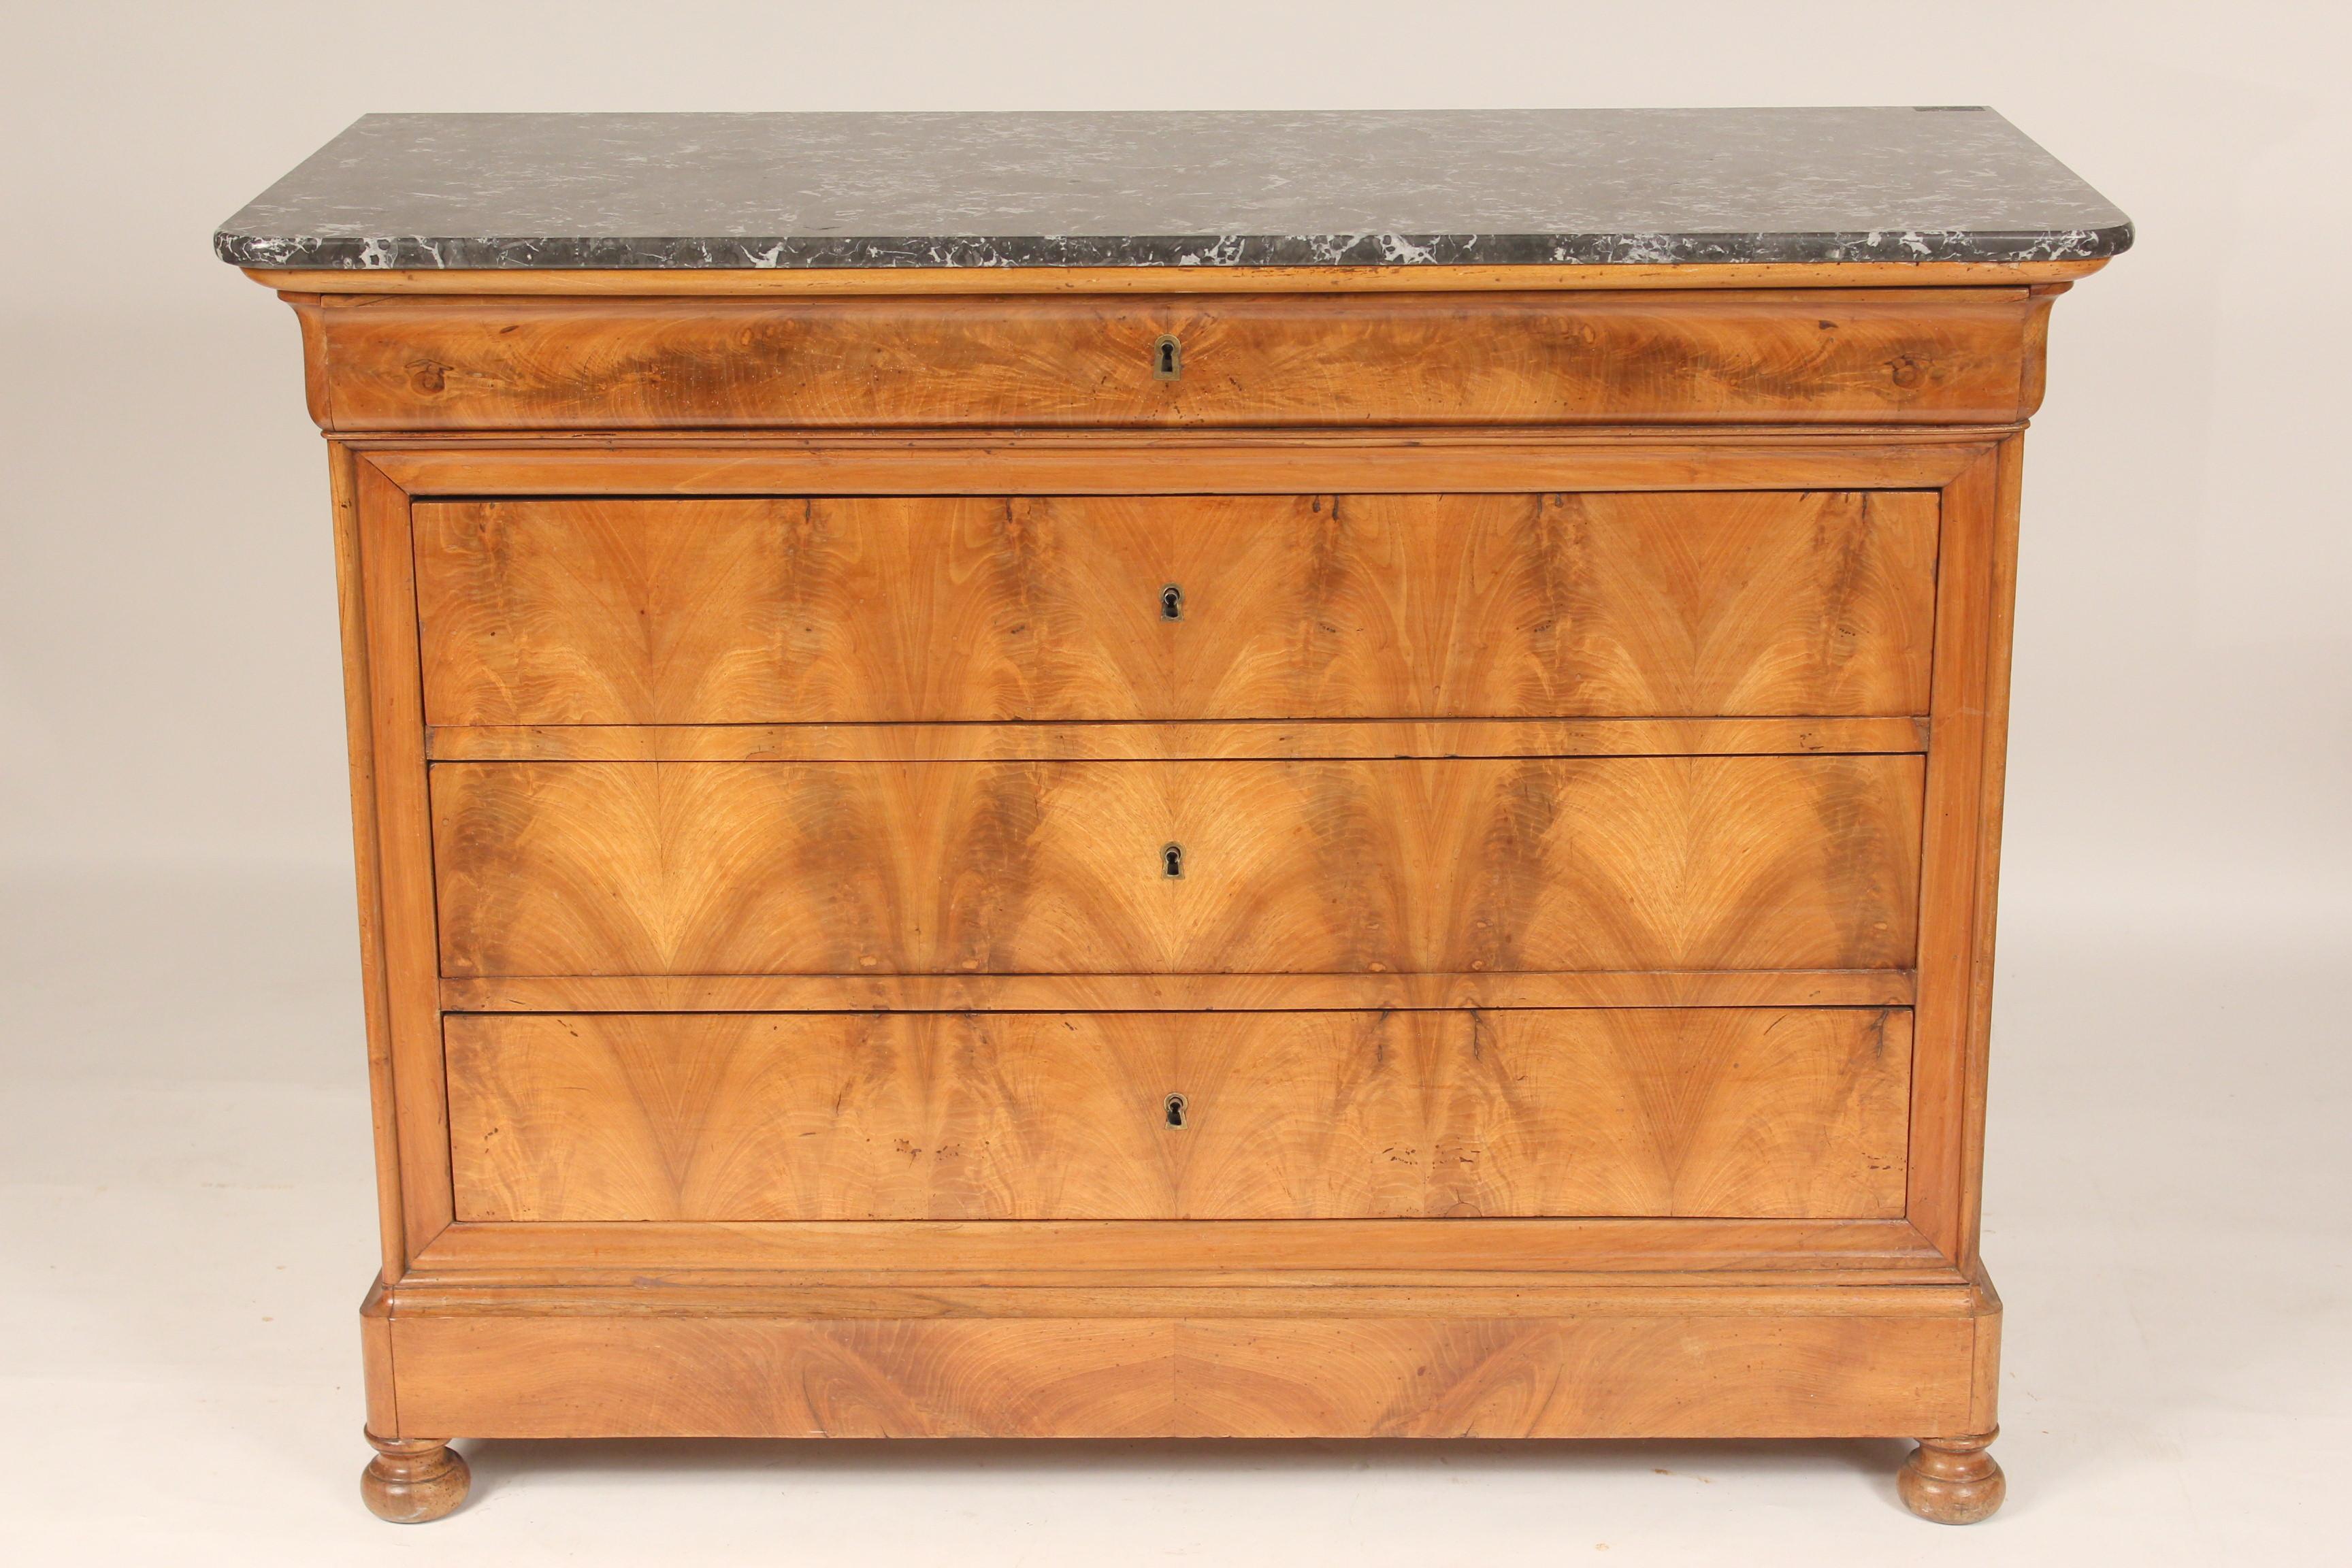 Louis Philippe burl walnut chest of drawers with marble top, circa 1840. With original marble top, exquisite burl walnut used on front drawers and hand dove tailed drawer construction.